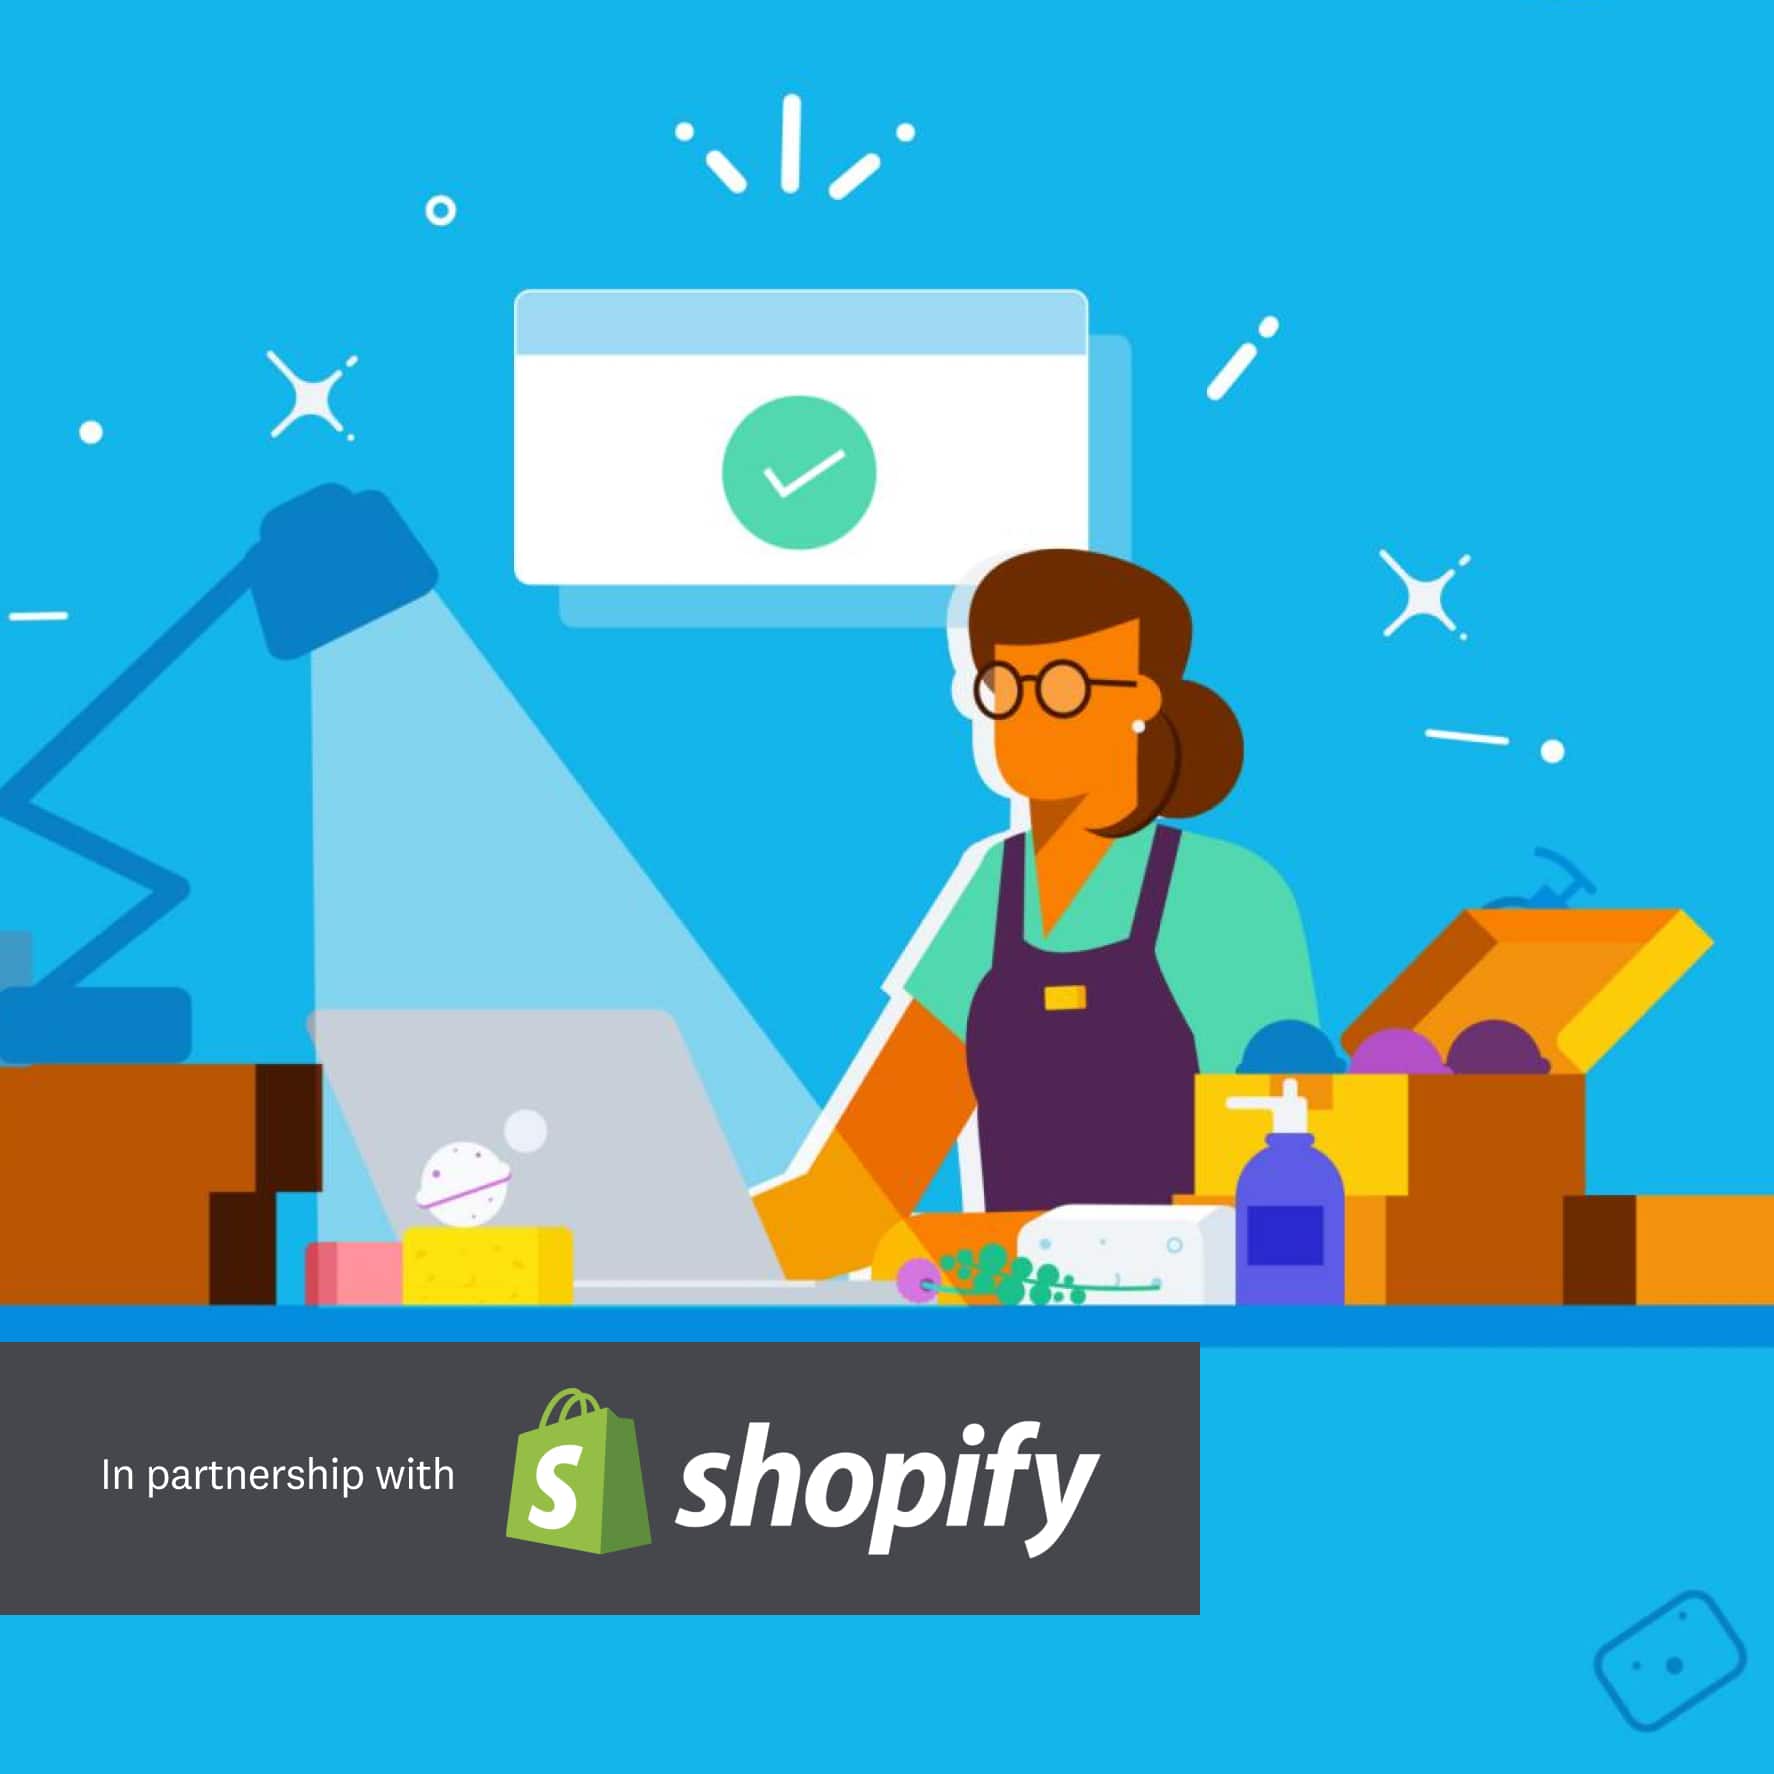 An ecommerce business owner reviews the day’s Shopify sales and cash flow figures on their laptop.